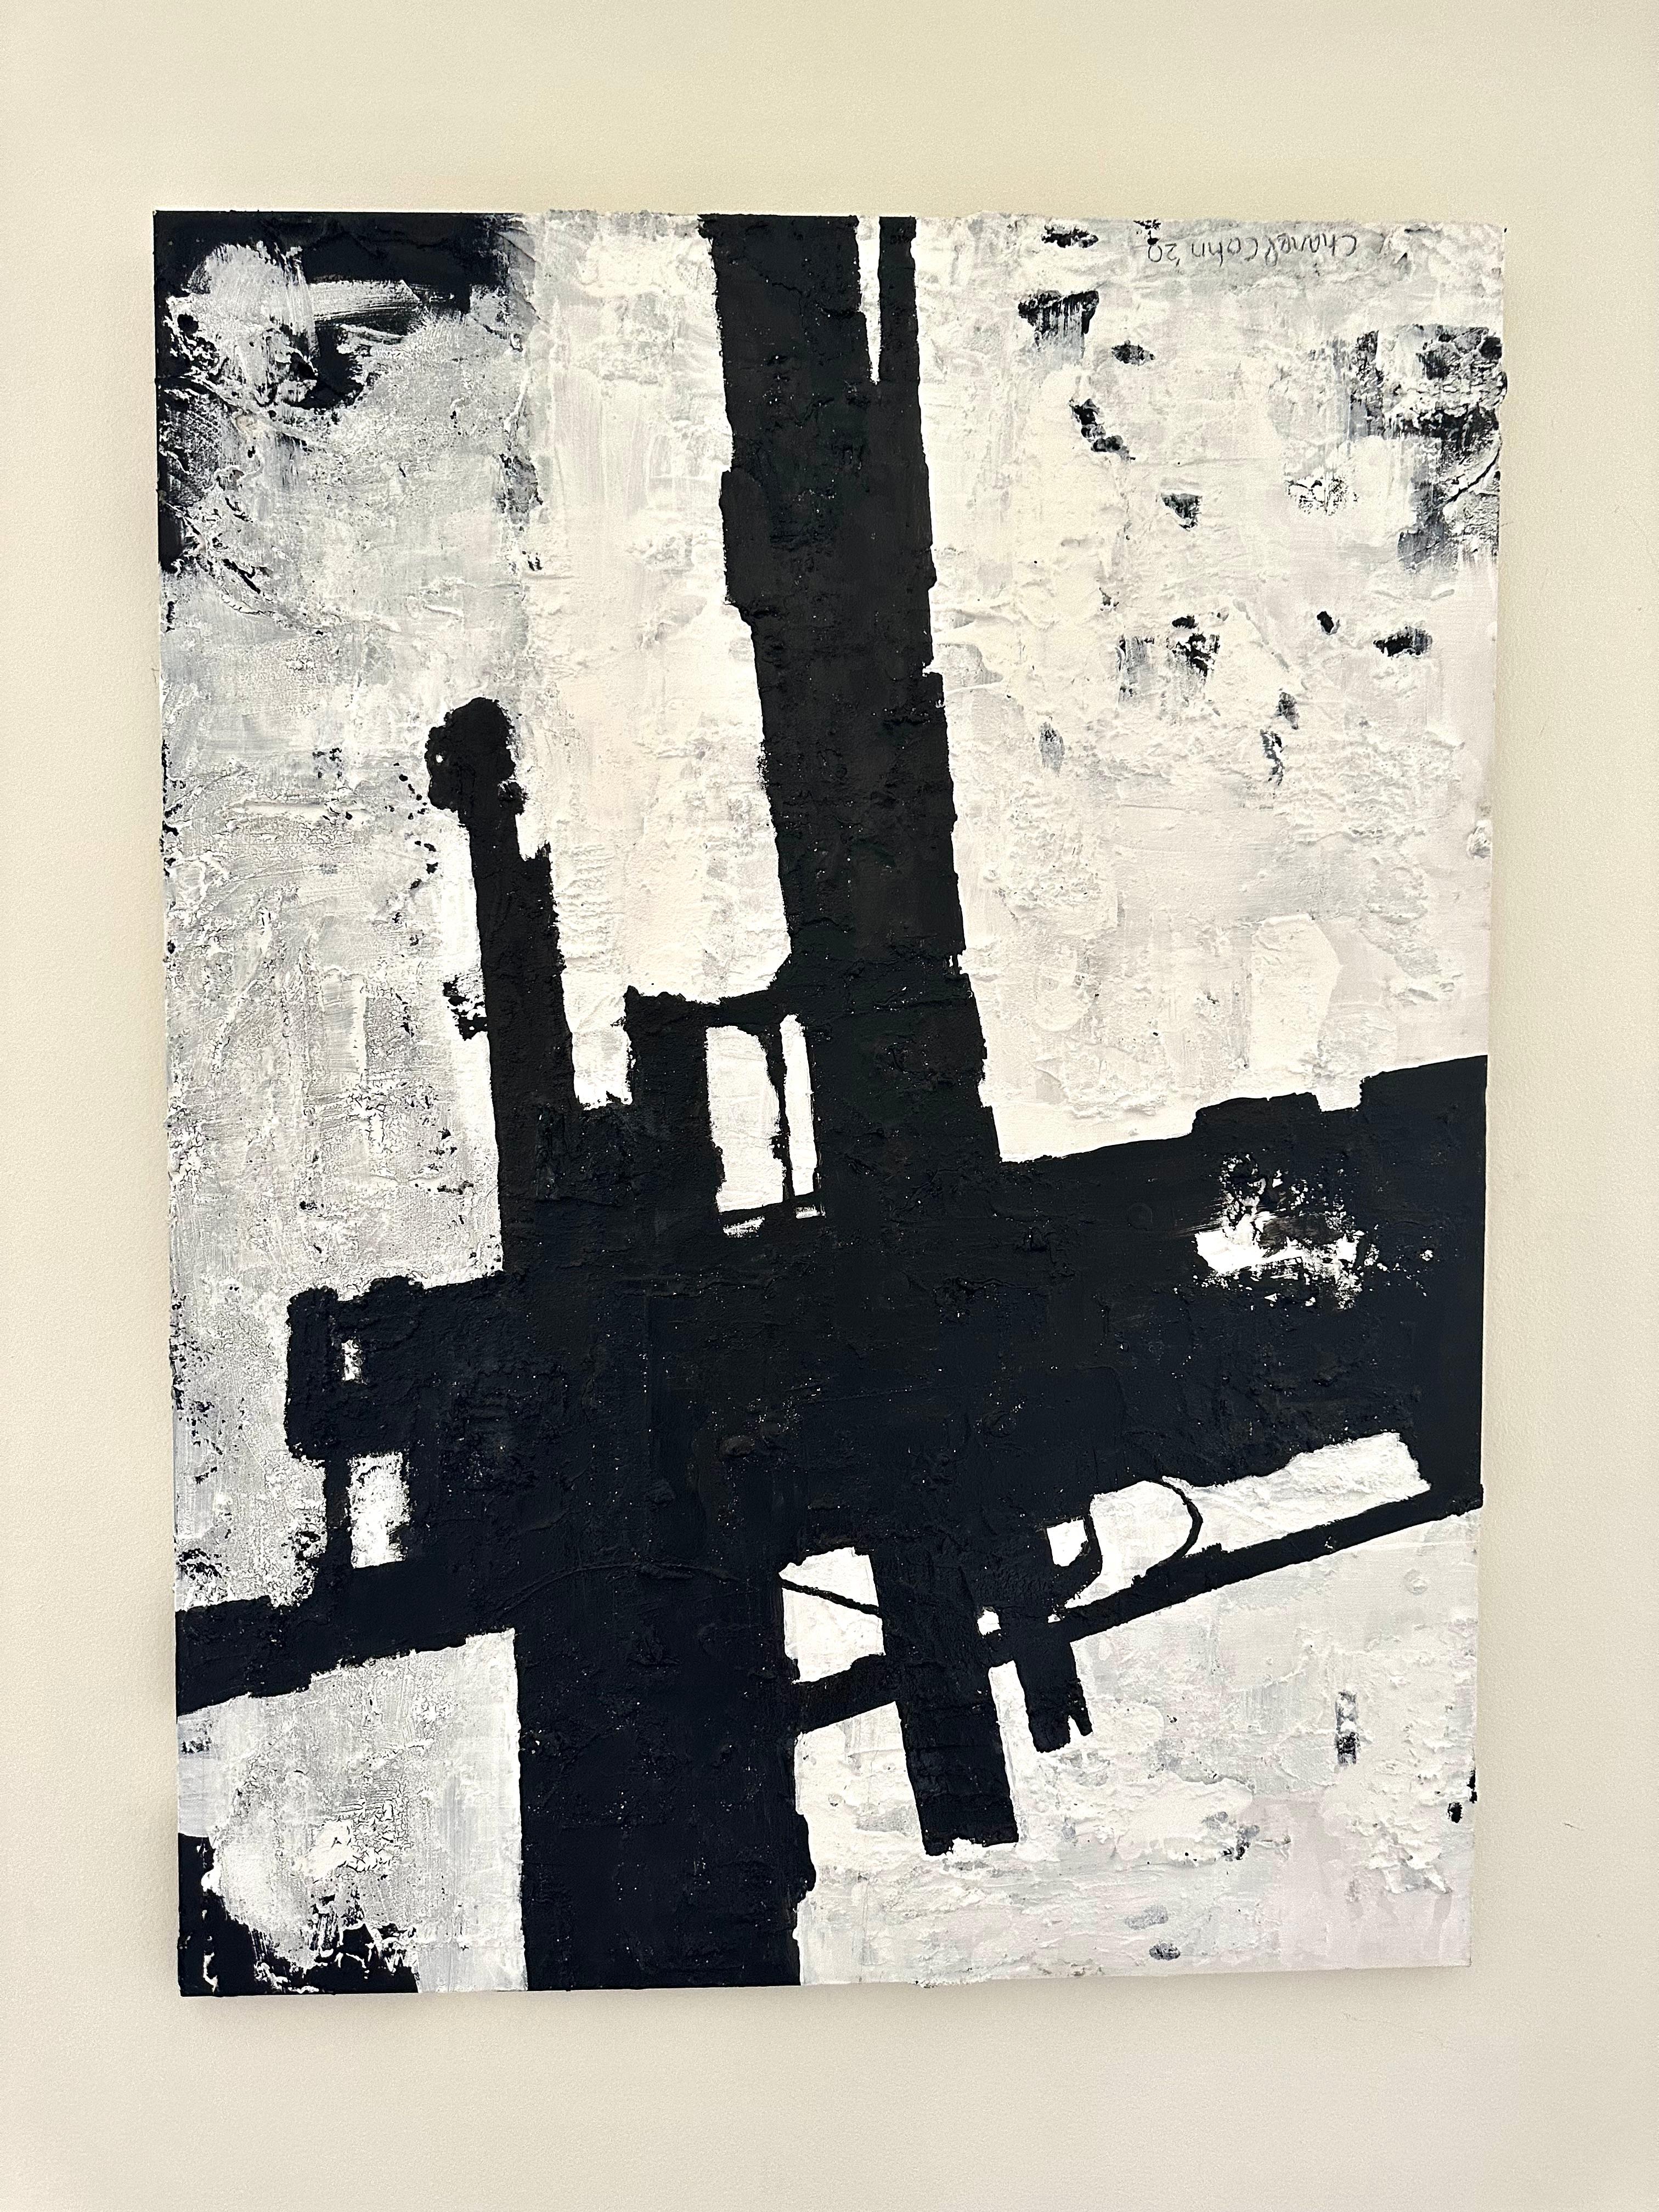 Empire State of Mind, 40x30, Mixed Media, Concrete, Gesso & Acrylic on Canvas   - Mixed Media Art by Chanel Cohn